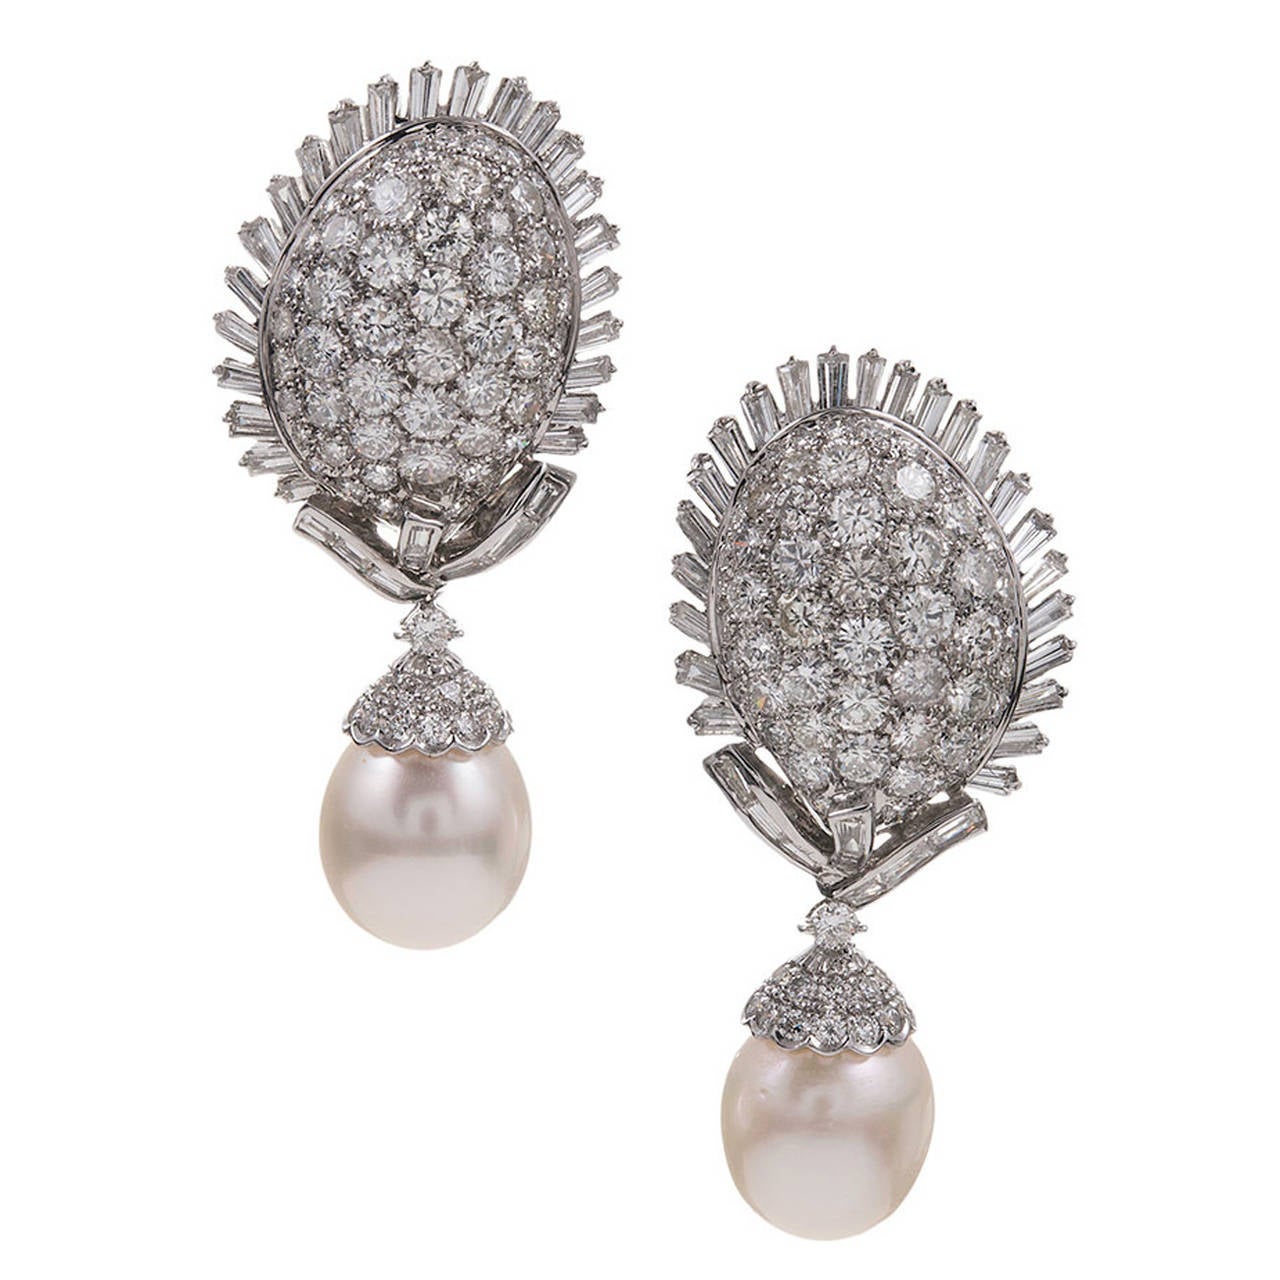 Diamond Earrings with Pearl Drop Enhancers, signed “Rothchild” at 1stDibs